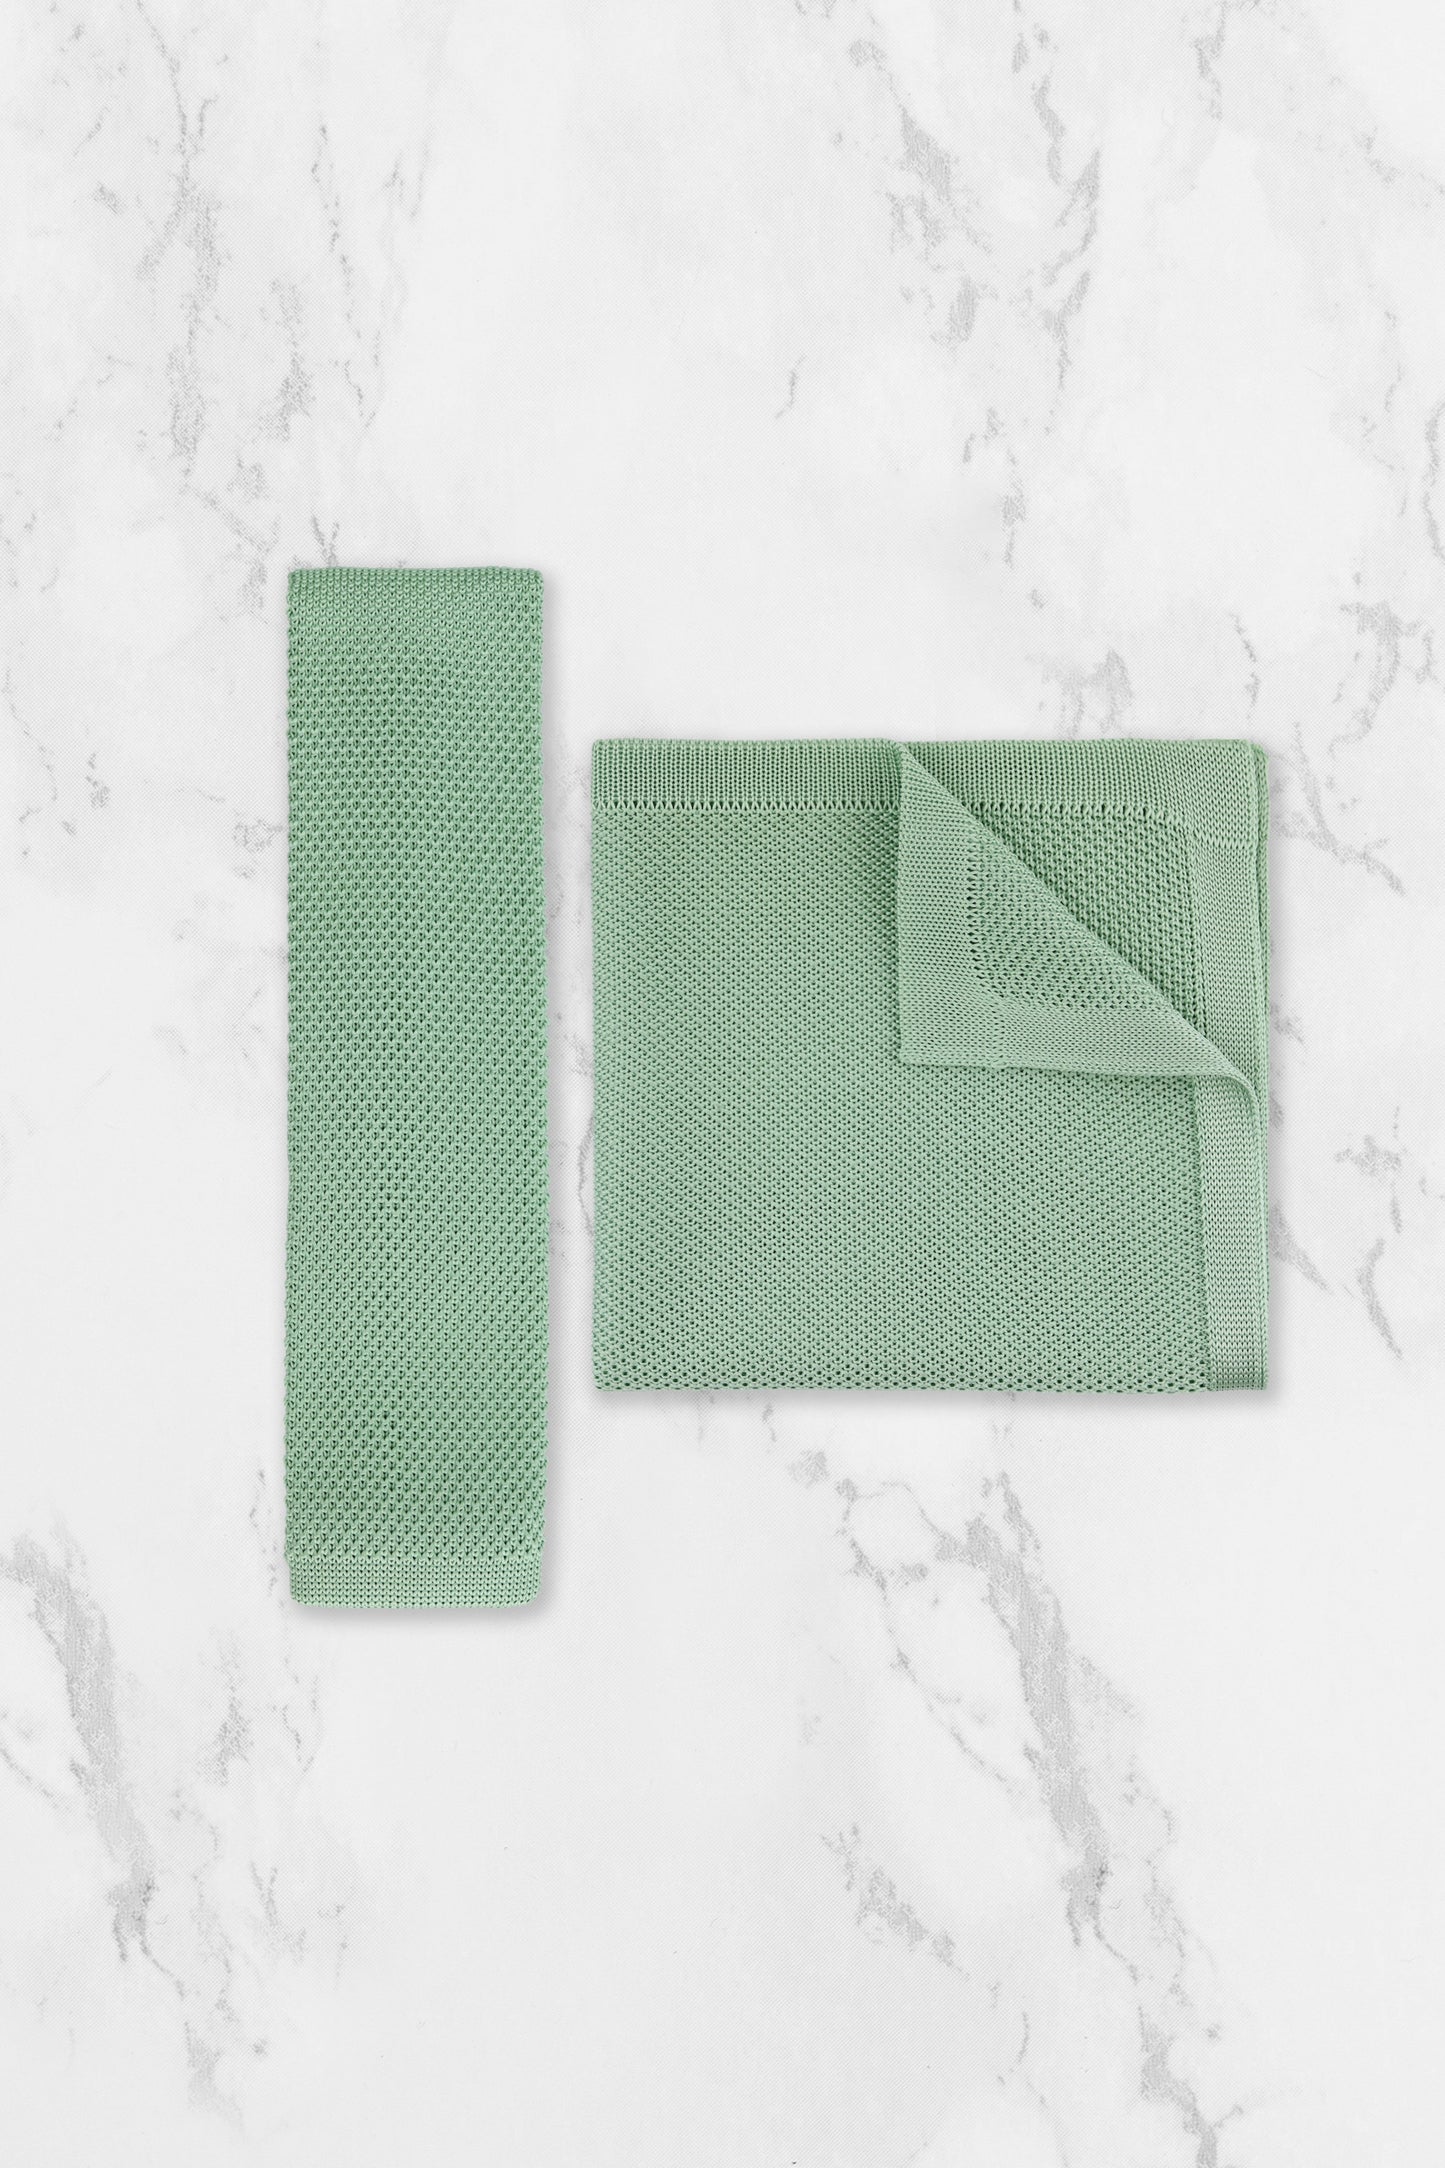 100% Polyester Square End Knitted Tie - Sage Green